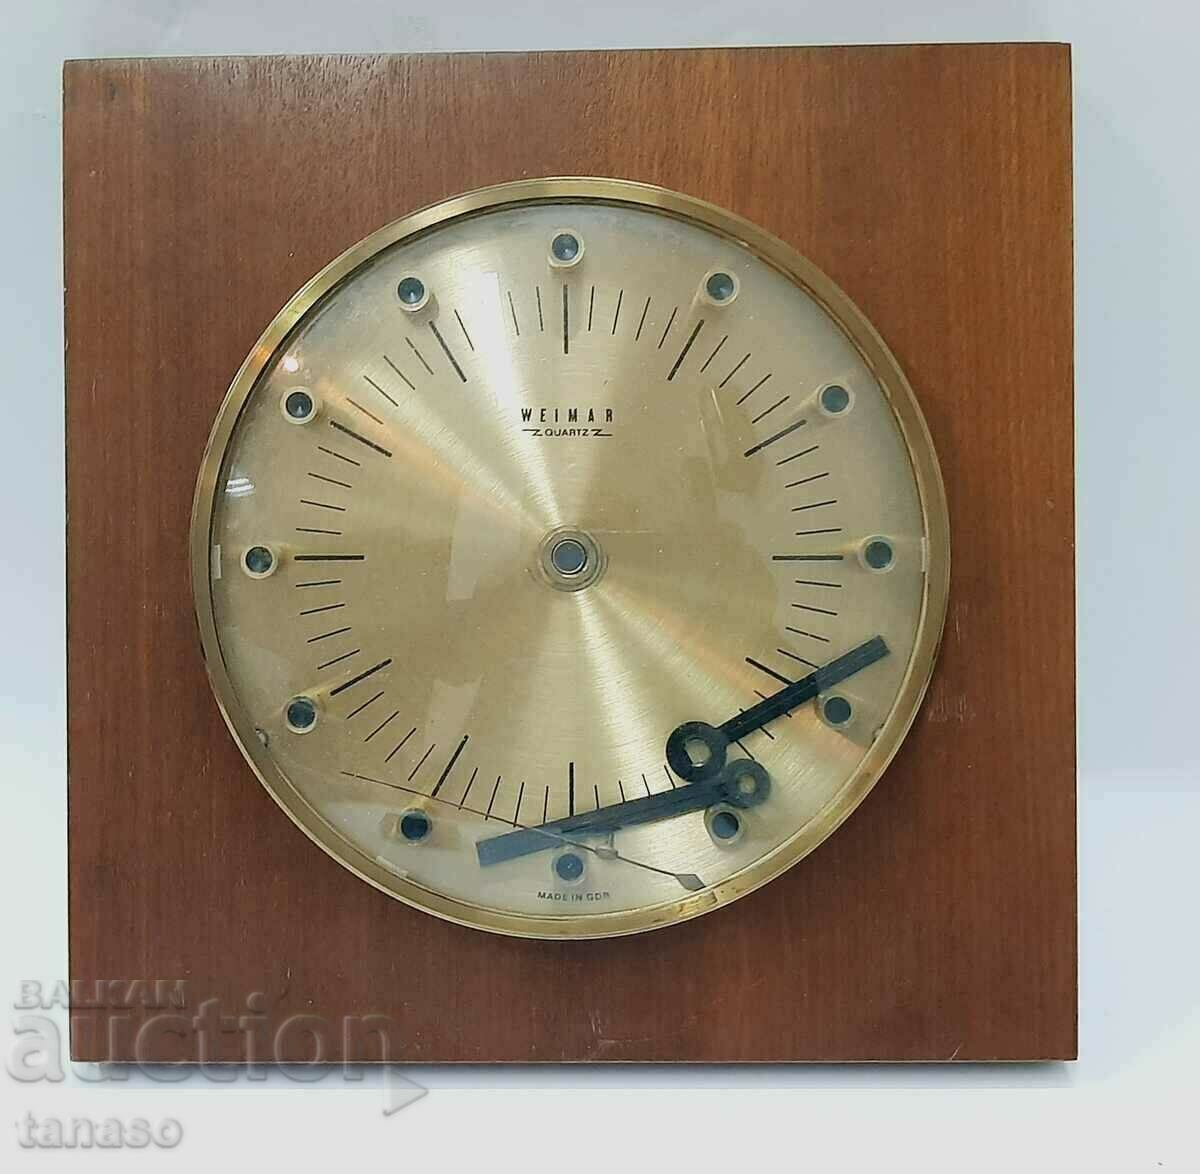 Dial, glass and hands from a Weimar clock, GDR(7.3)